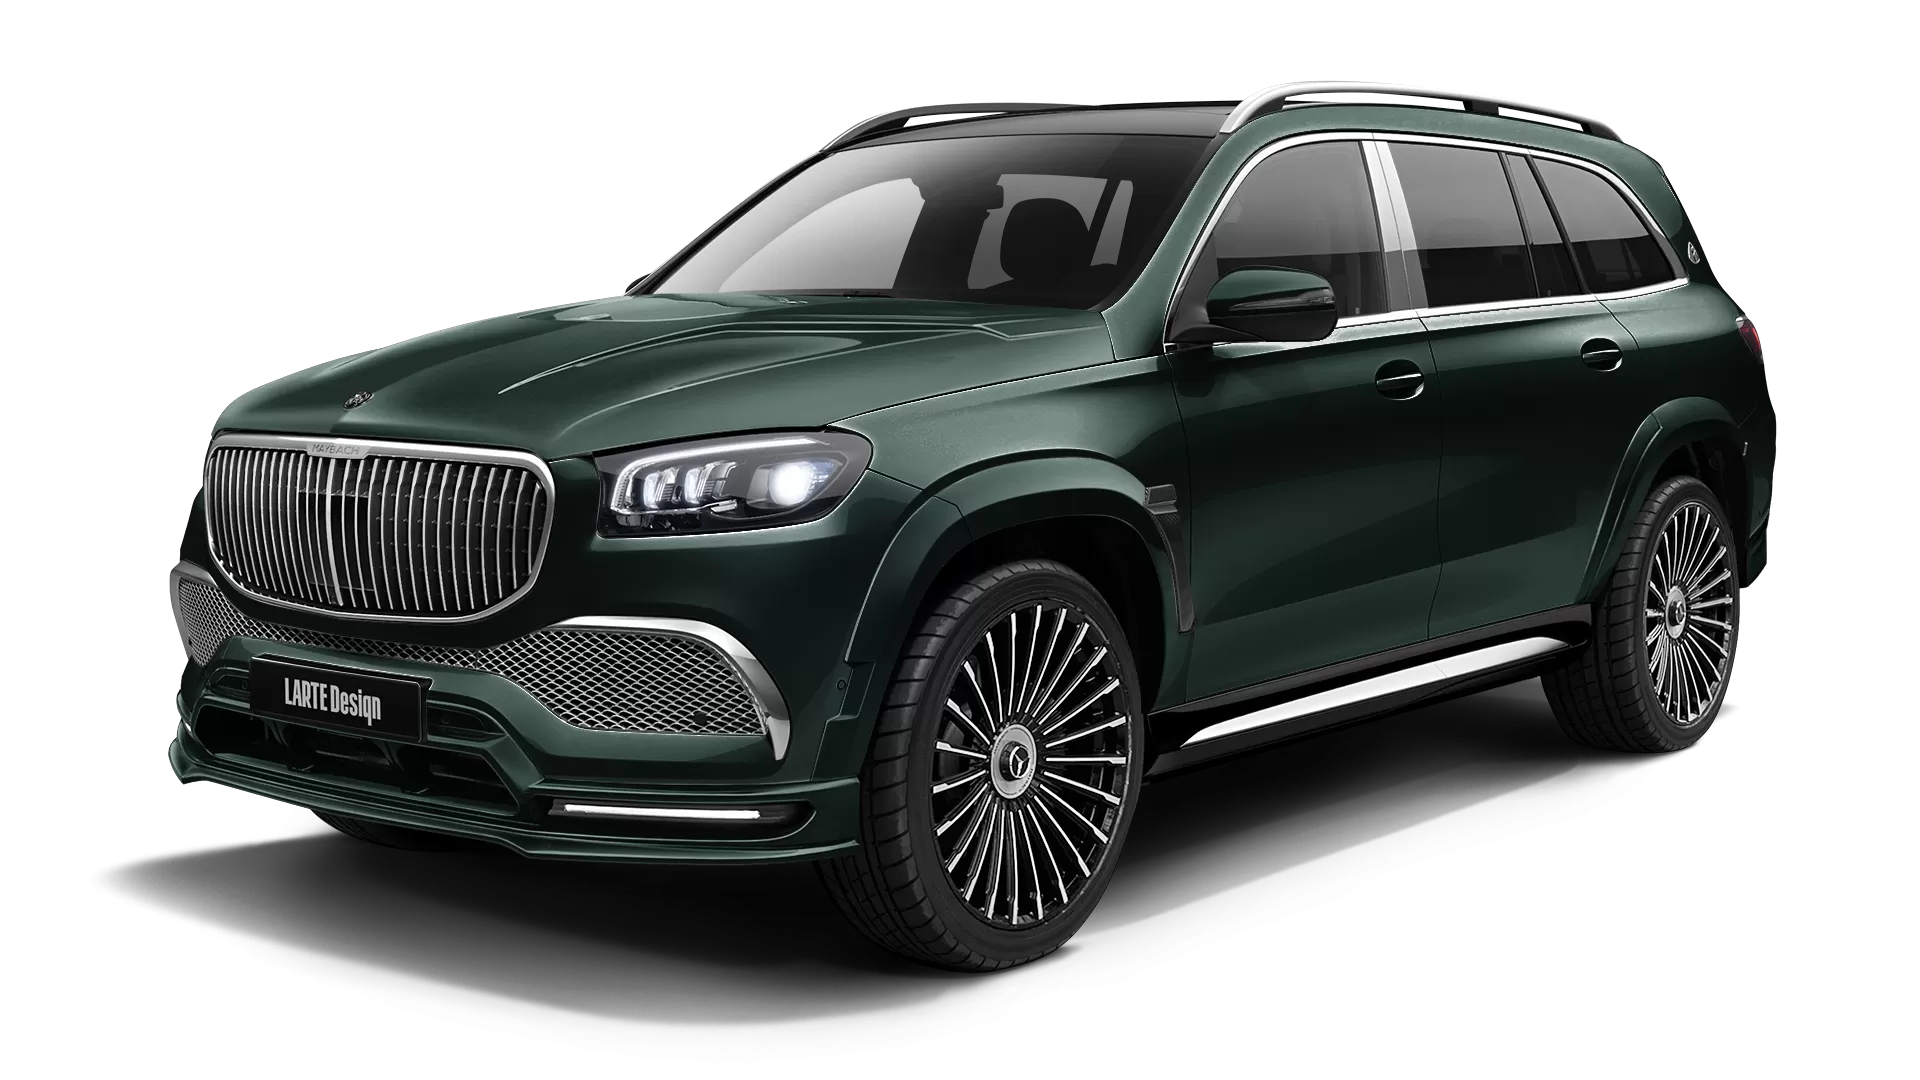 Mercedes Maybach GLS 600 with painted body kit: front view shown in Emerald Green